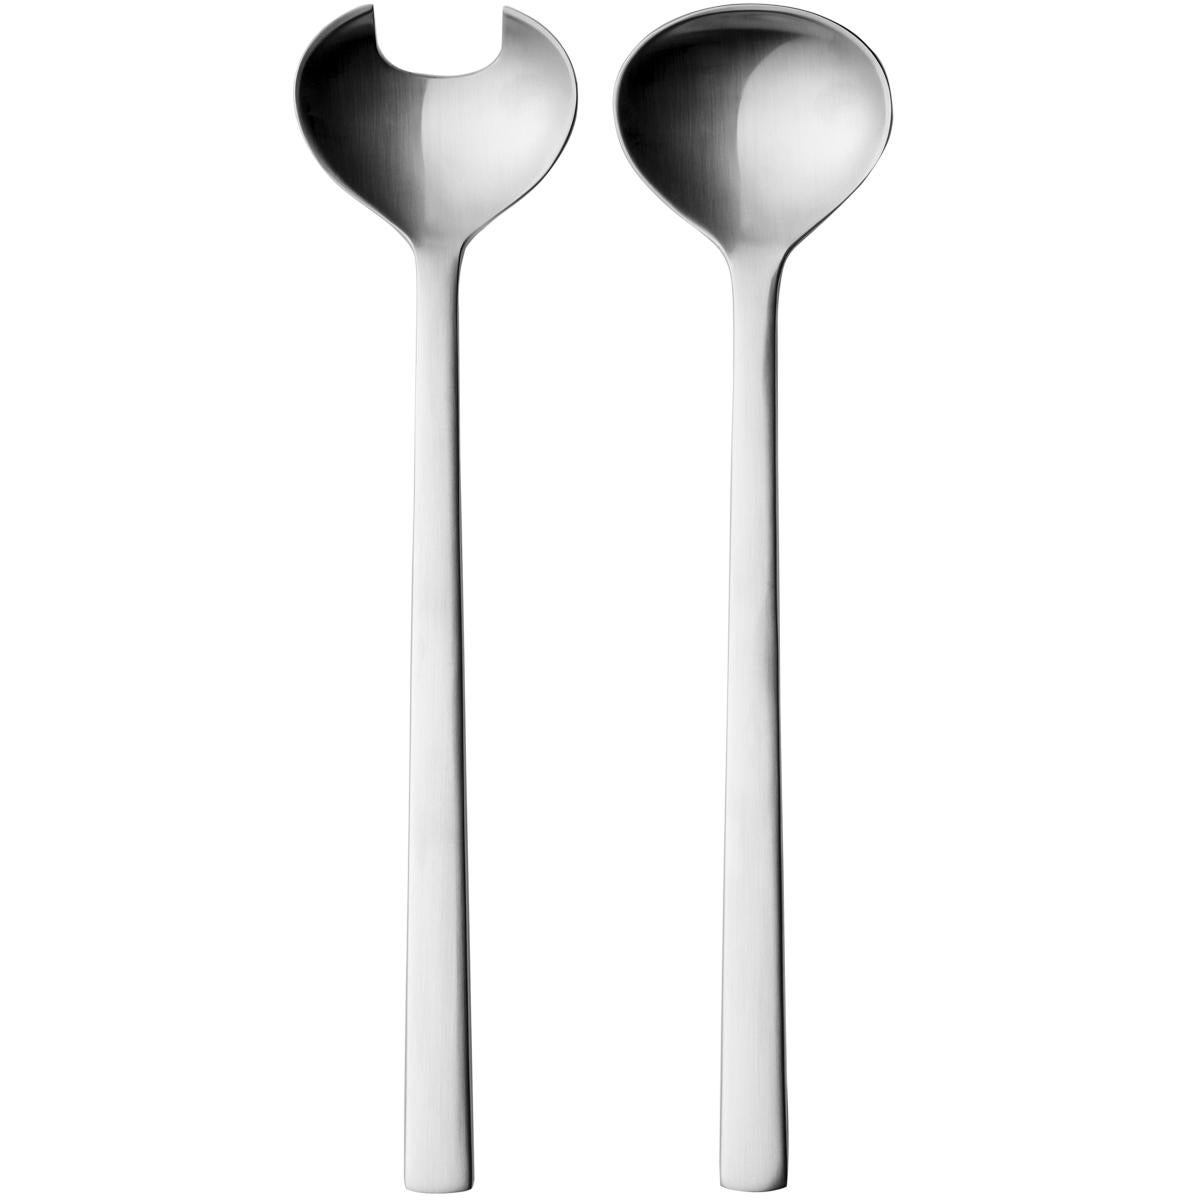 Stainless steel salad server giftbox. Henning Koppel designed the New York cutlery patternin 1963 as a tribute for a world exhibition in New York City. It instantly made history as a new departure in design for its clear-cut lines where the form